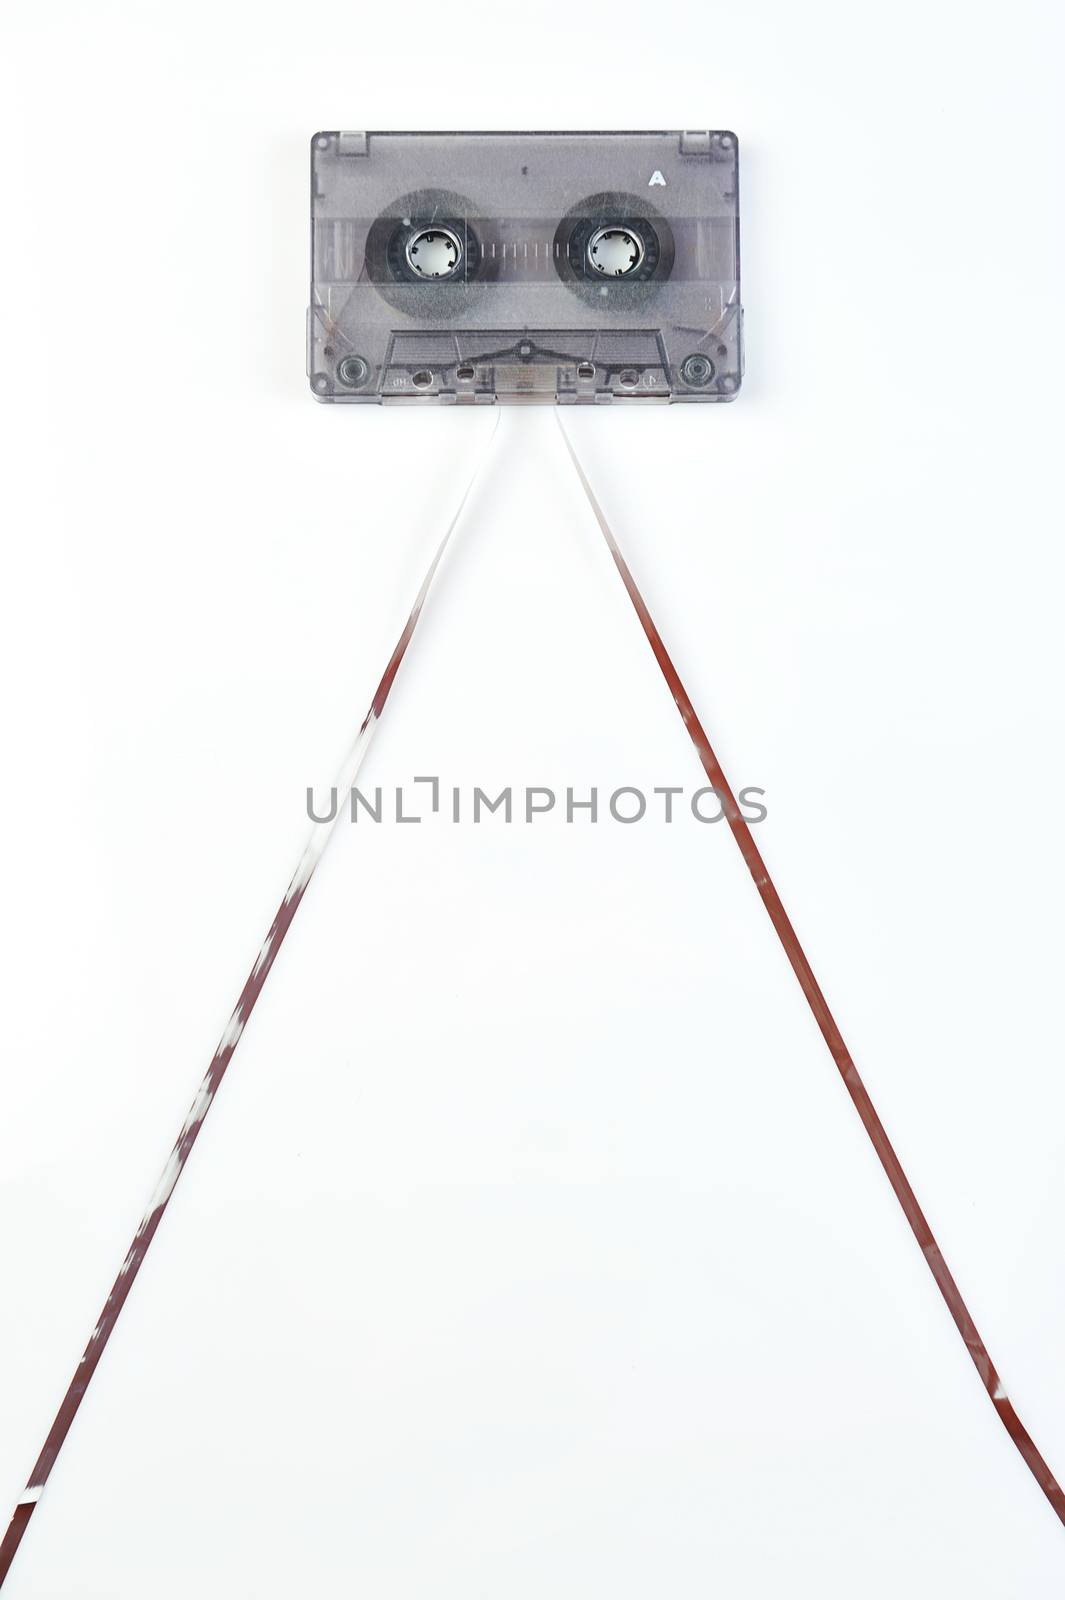 Audio casette with tape on a white background